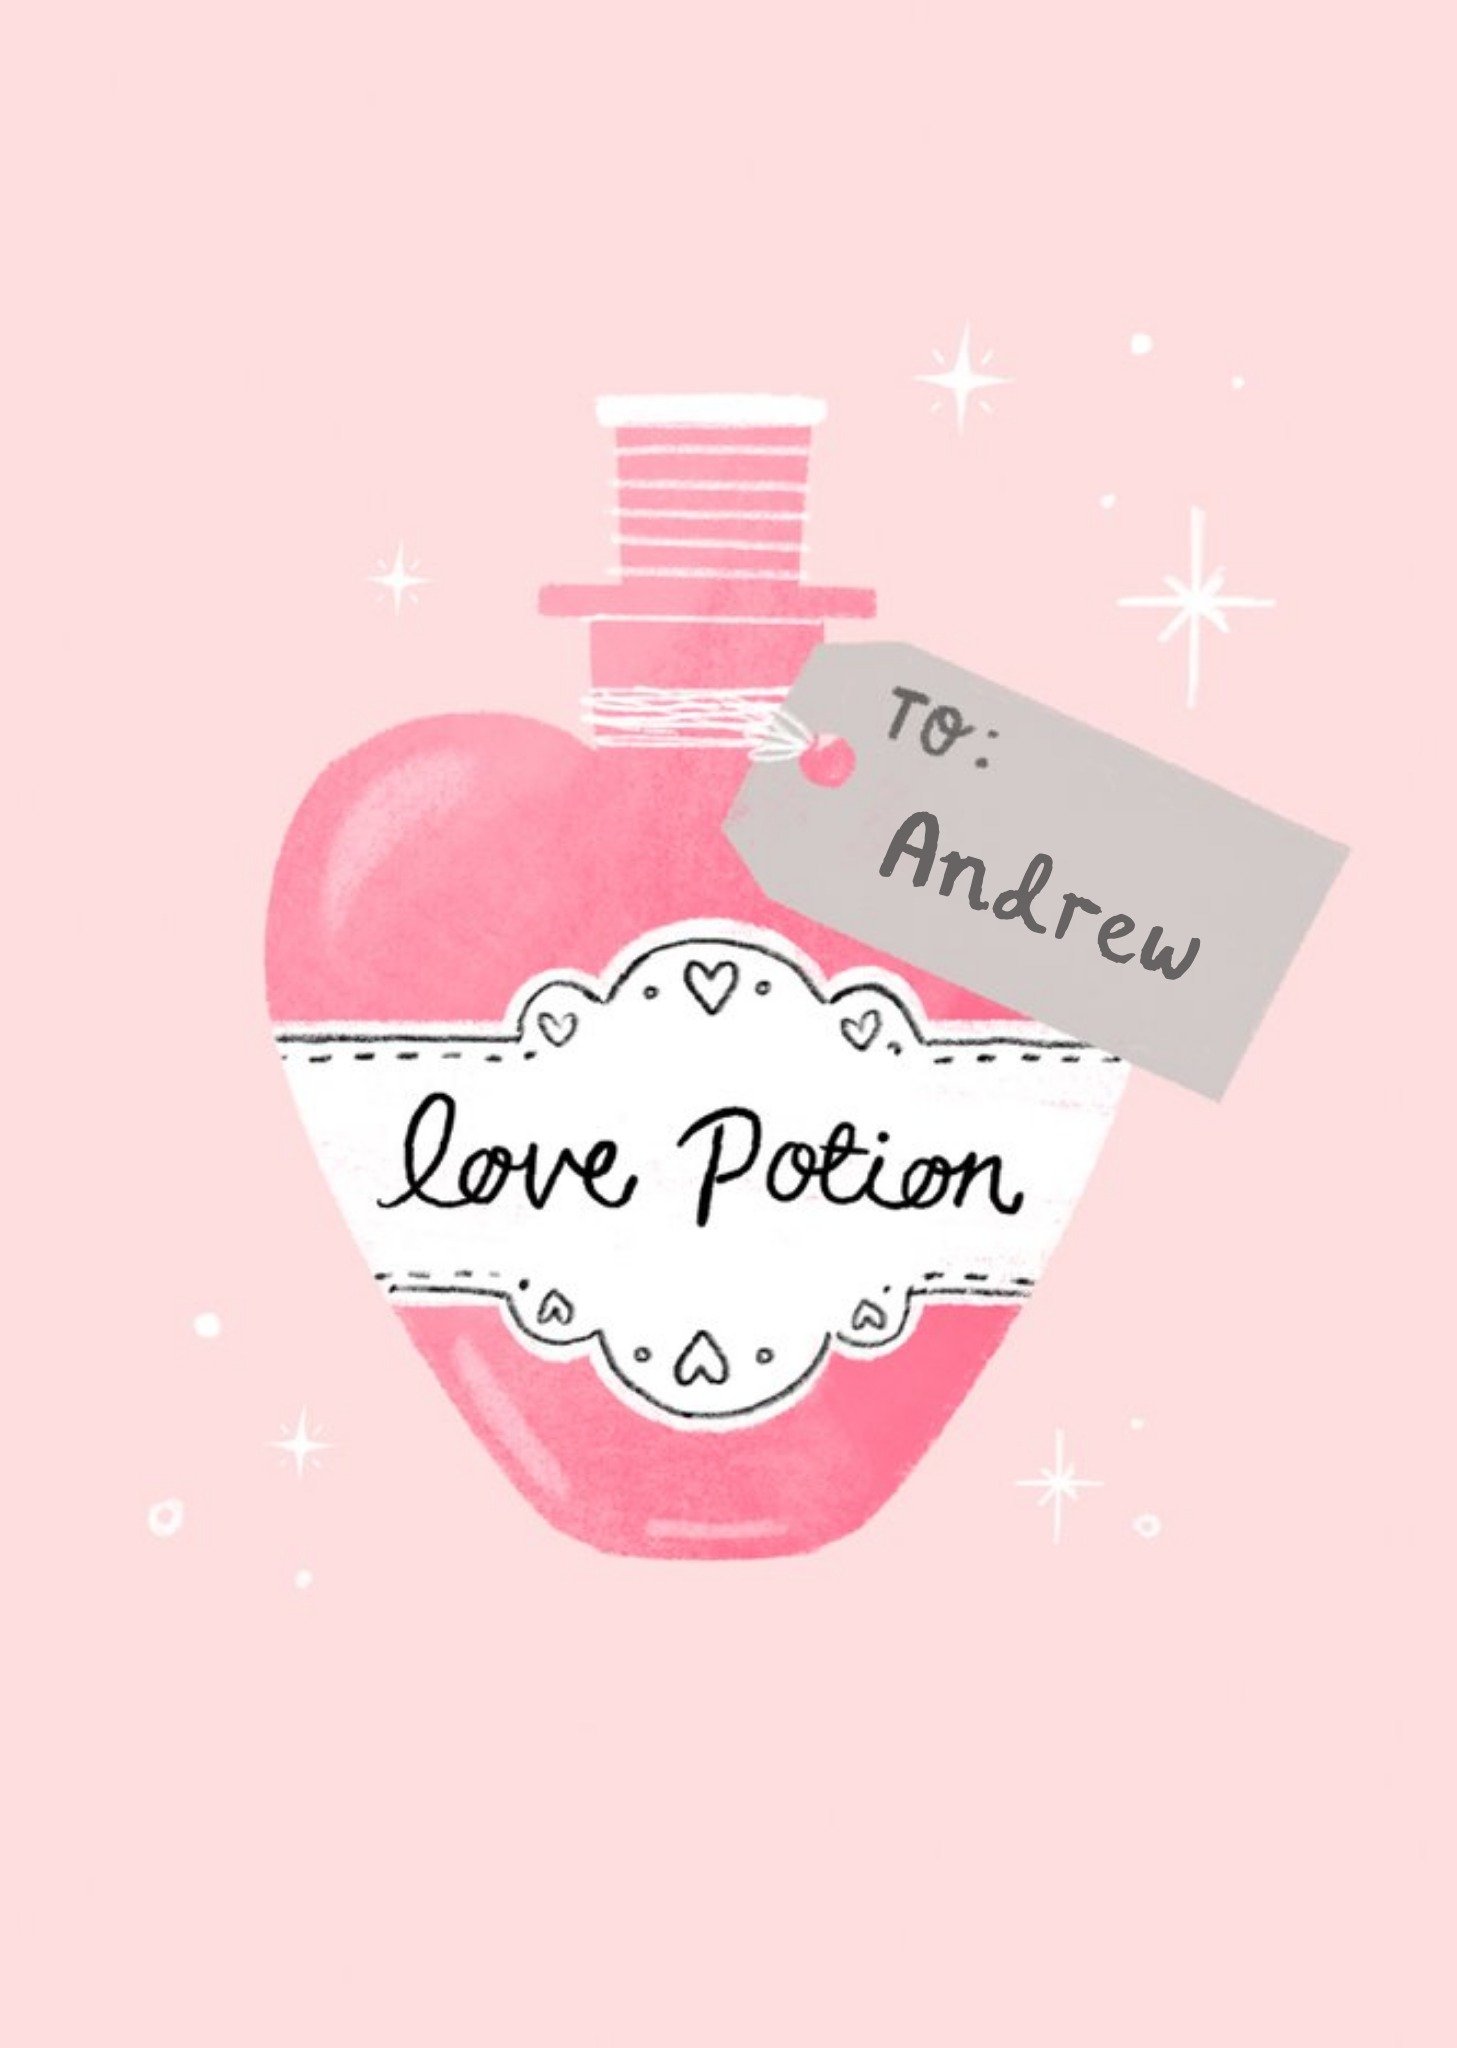 Moonpig Millicent Venton Illustrated Love Potion Valentines Day Card, Large